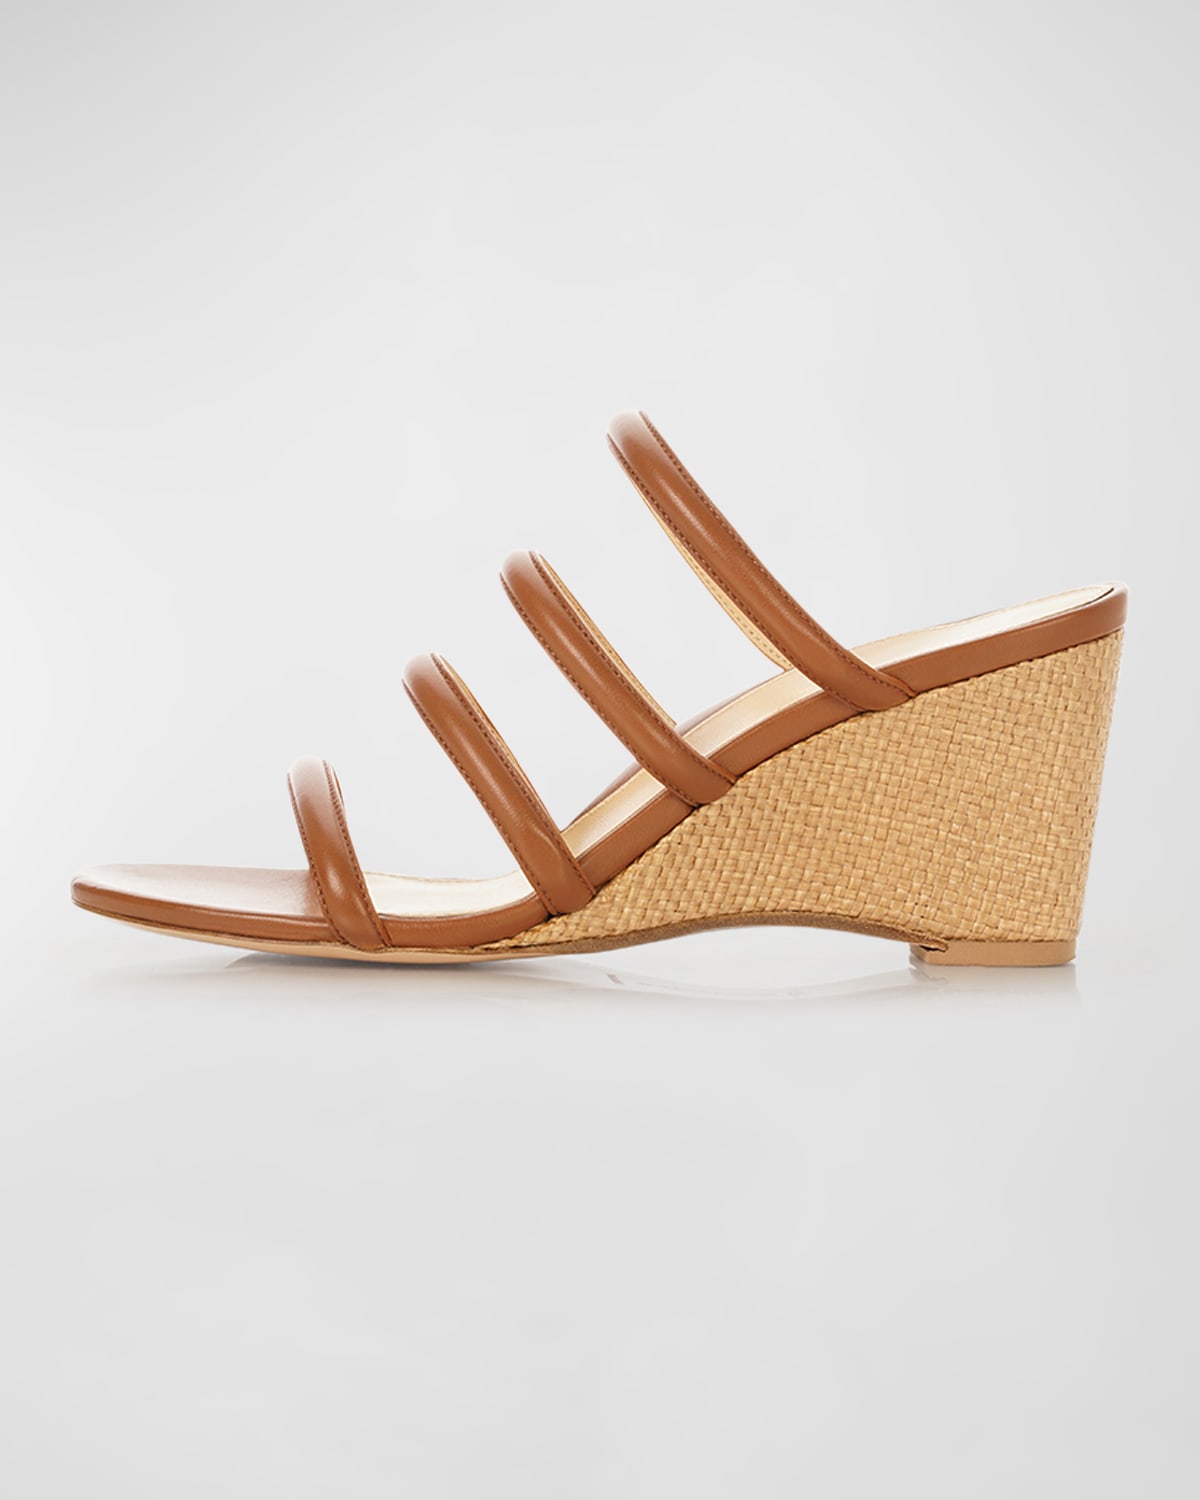 Marion Parke Stefi 70mm Wedge Sandals In Natural/tan